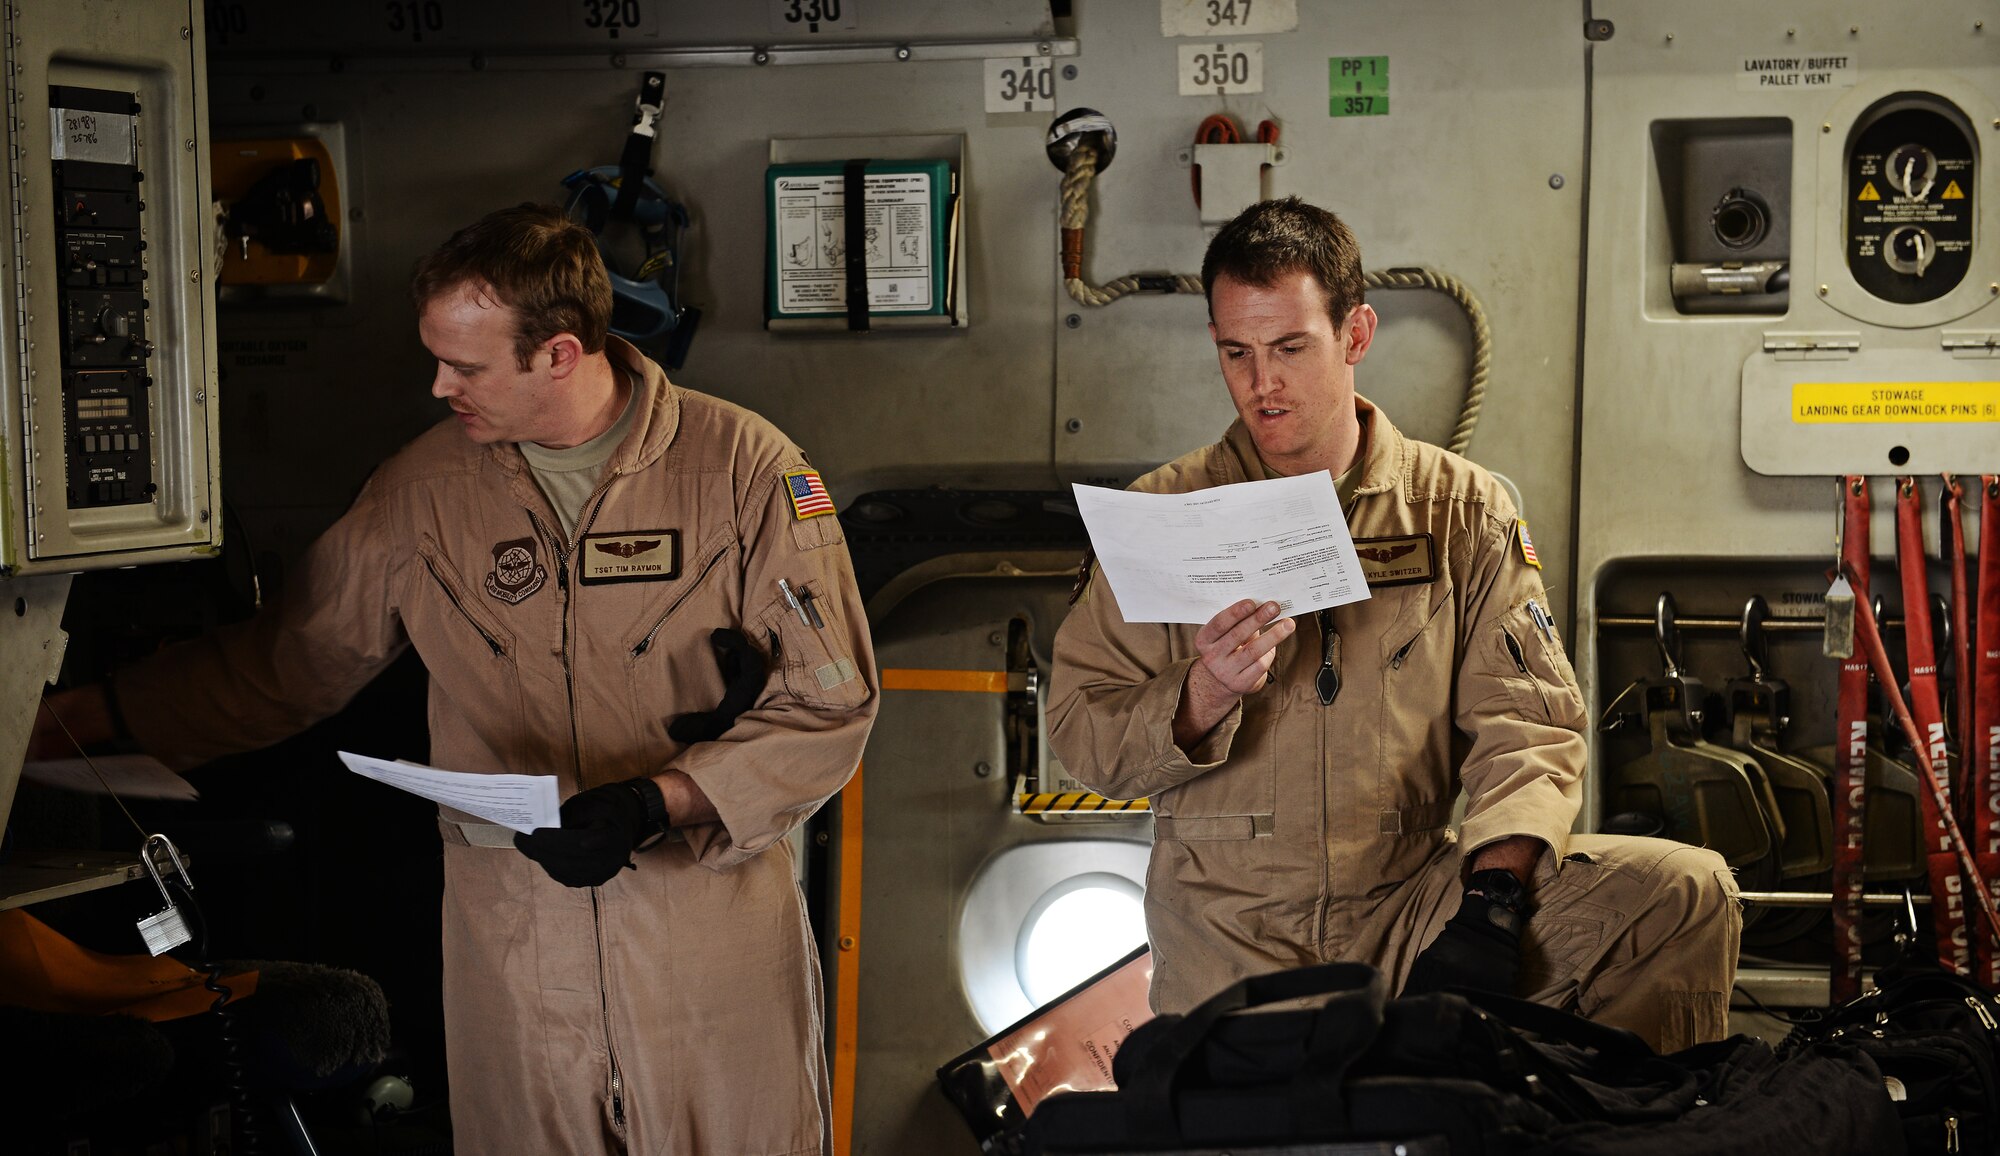 Tech. Sgt. Tim Raymon and Airman 1st Class Kyle Switzer, 62nd Airlift Wing loadmasters, review their load plan before flying into Rwanda to pick up Rwandan soldiers and equipment, Jan. 19, 2014. U.S. forces will transport a total number of 850 Rwandan soldiers and more than 1,000 tons of equipment into the Central African Republic to aid French and African Union operations against militants during this three weeklong operation. (U.S. Air Force photo Staff Sgt. Ryan Crane)